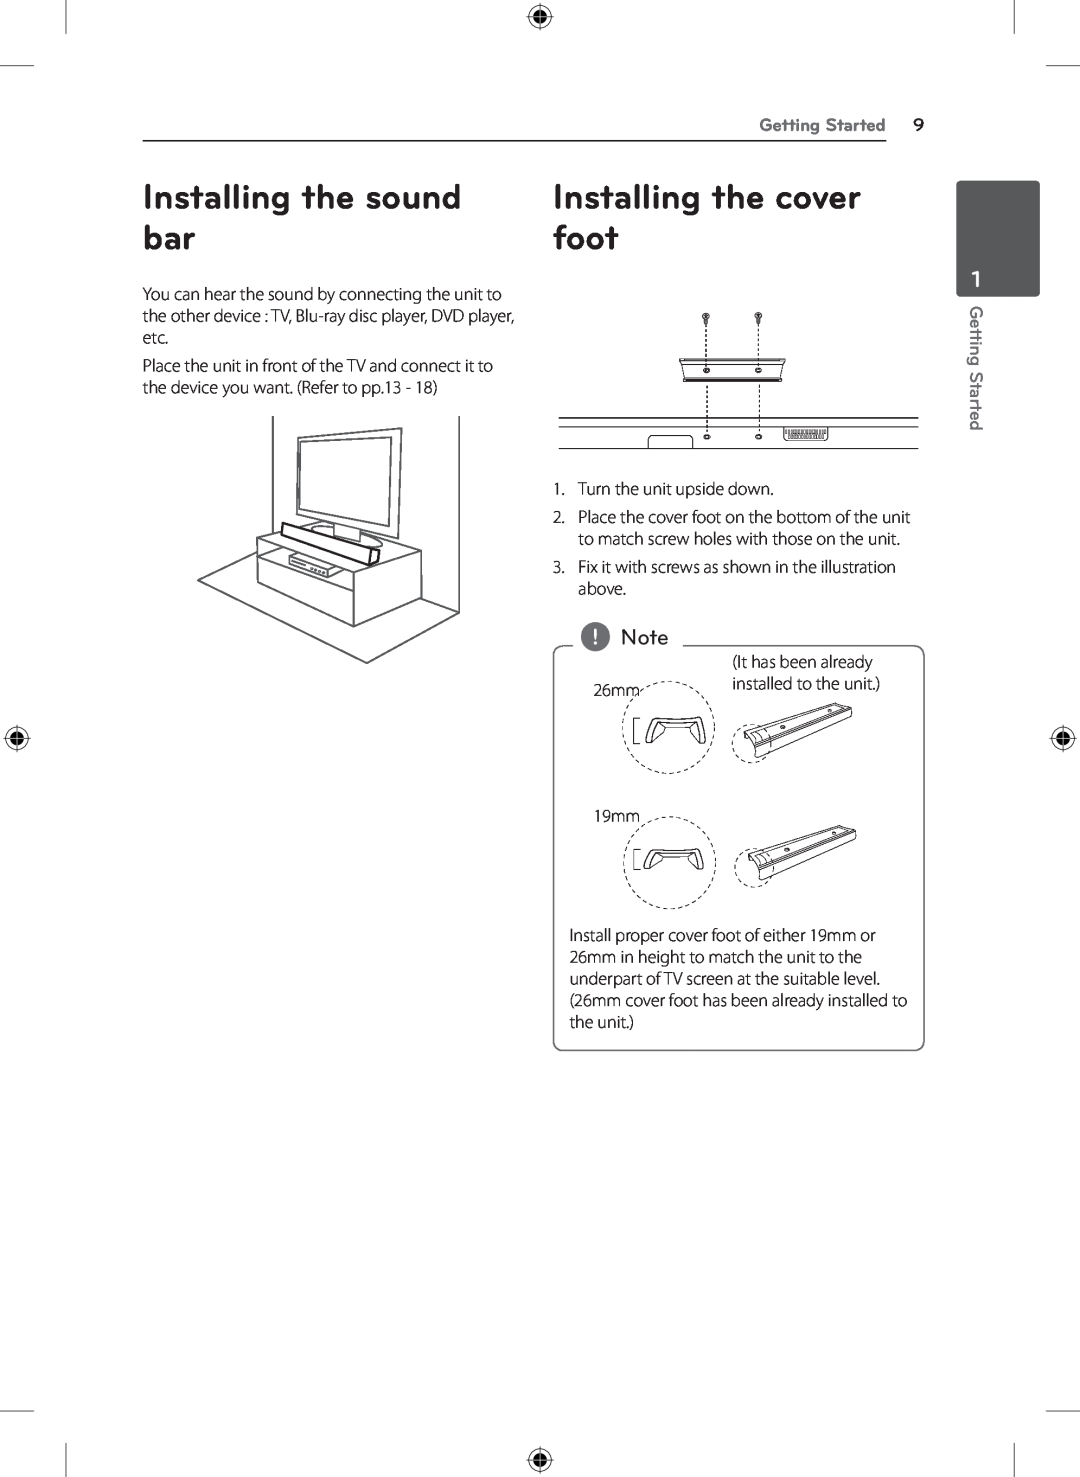 LG Electronics NB4530A, S43A1-D owner manual Installing the sound, Installing the cover, foot, Getting Started 